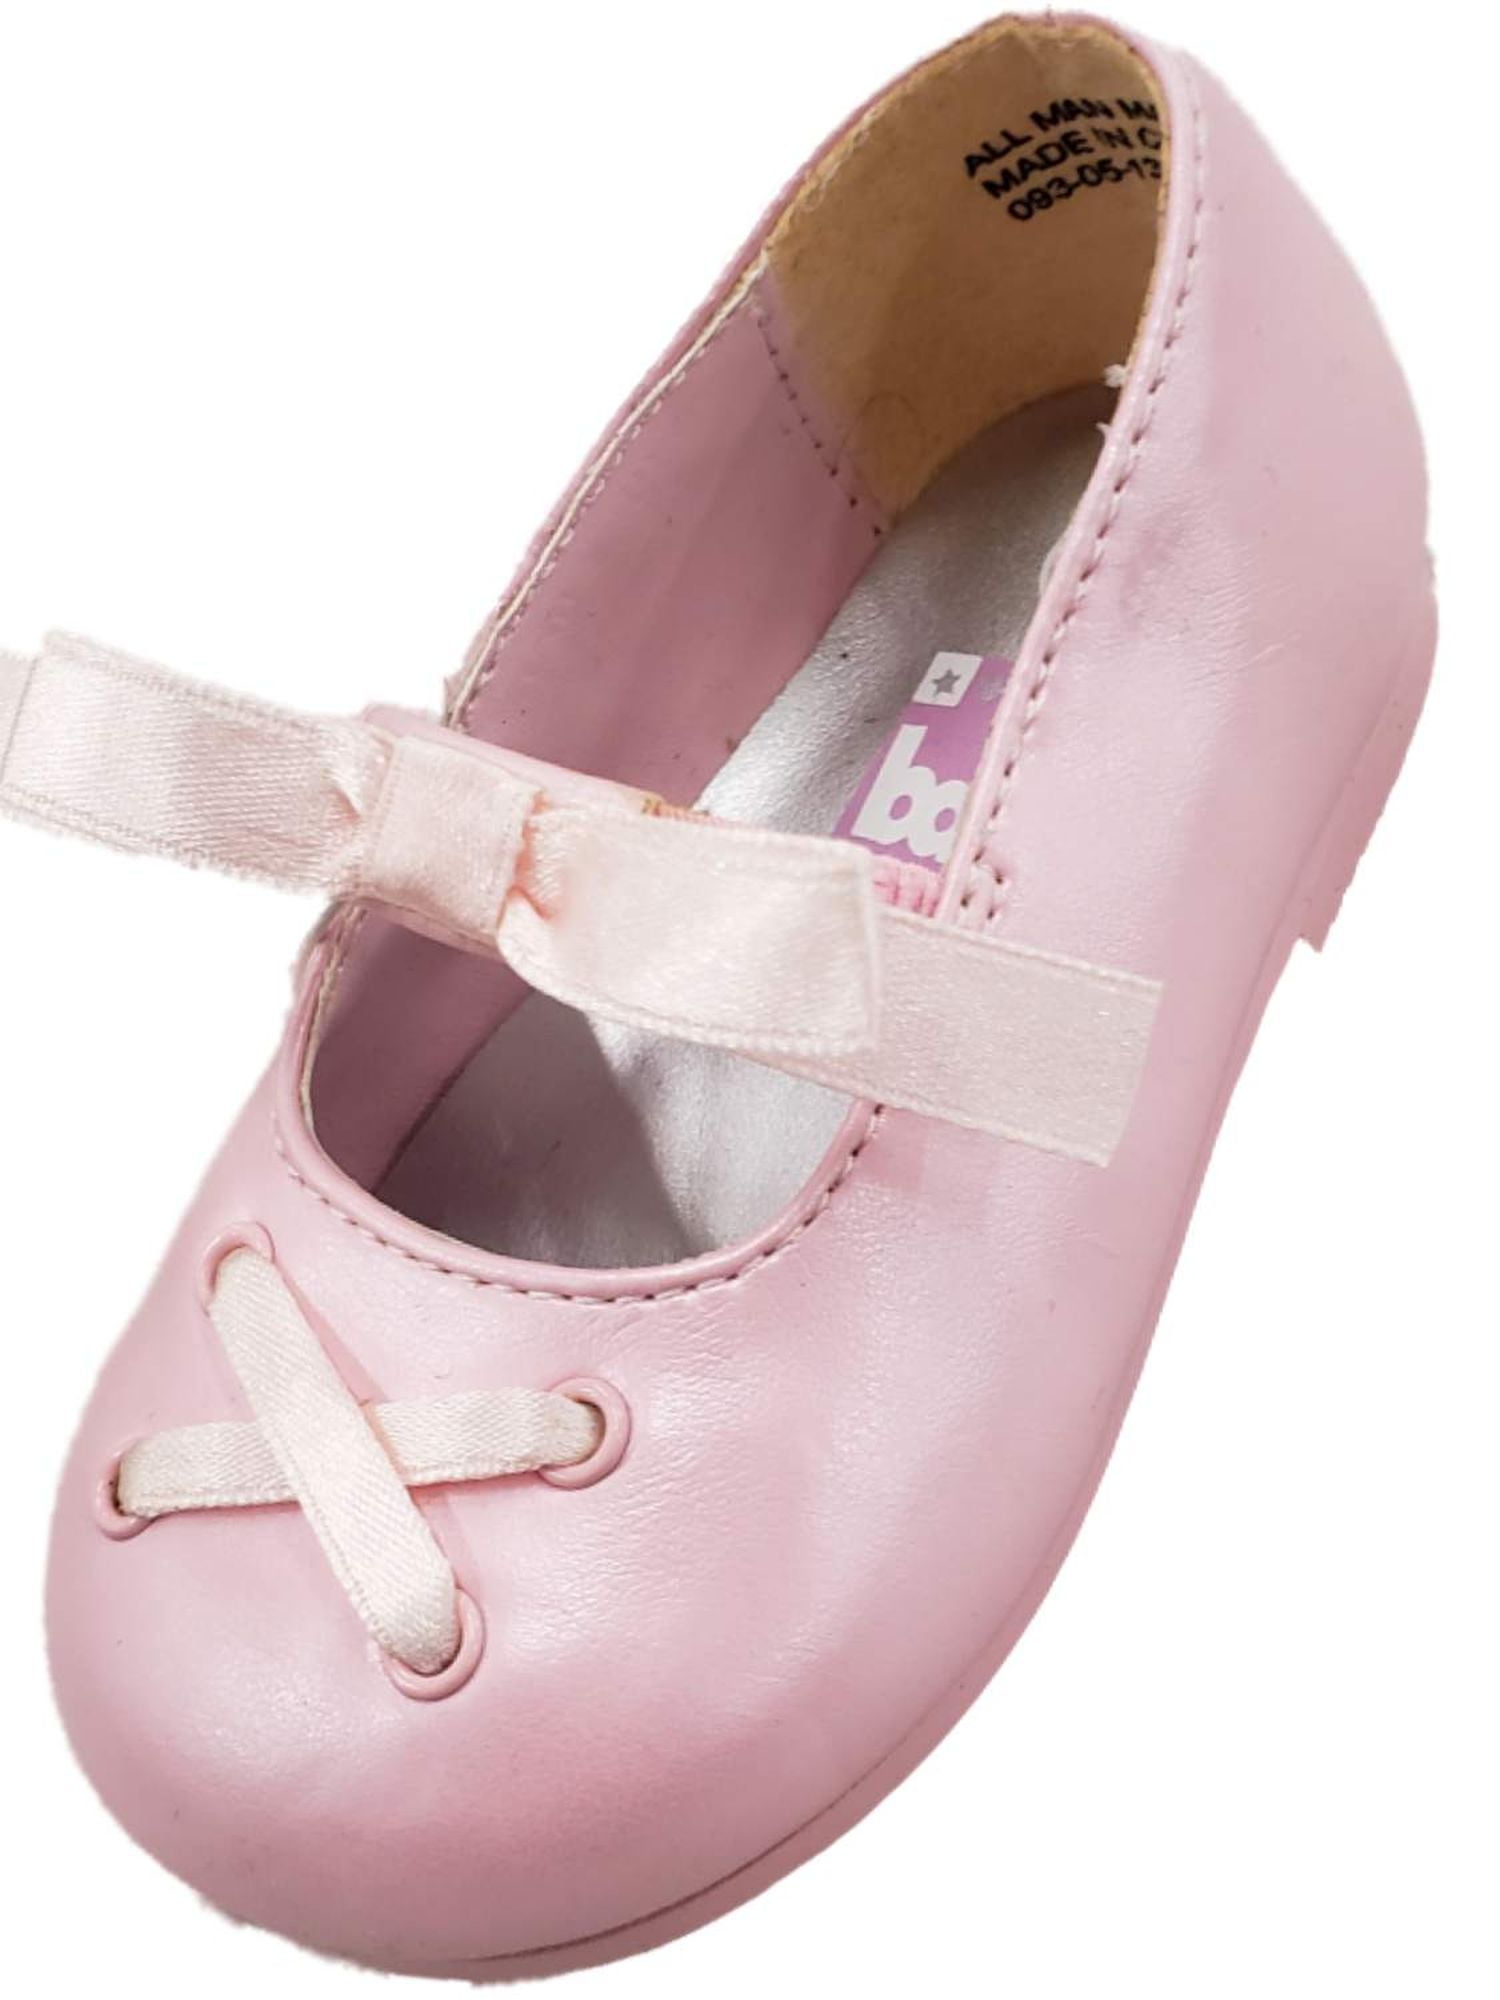 POPULAR BABY GIRLS PINK BALLET STYLE NON-SLIP SHOES,3 SZS AVAILABLE 